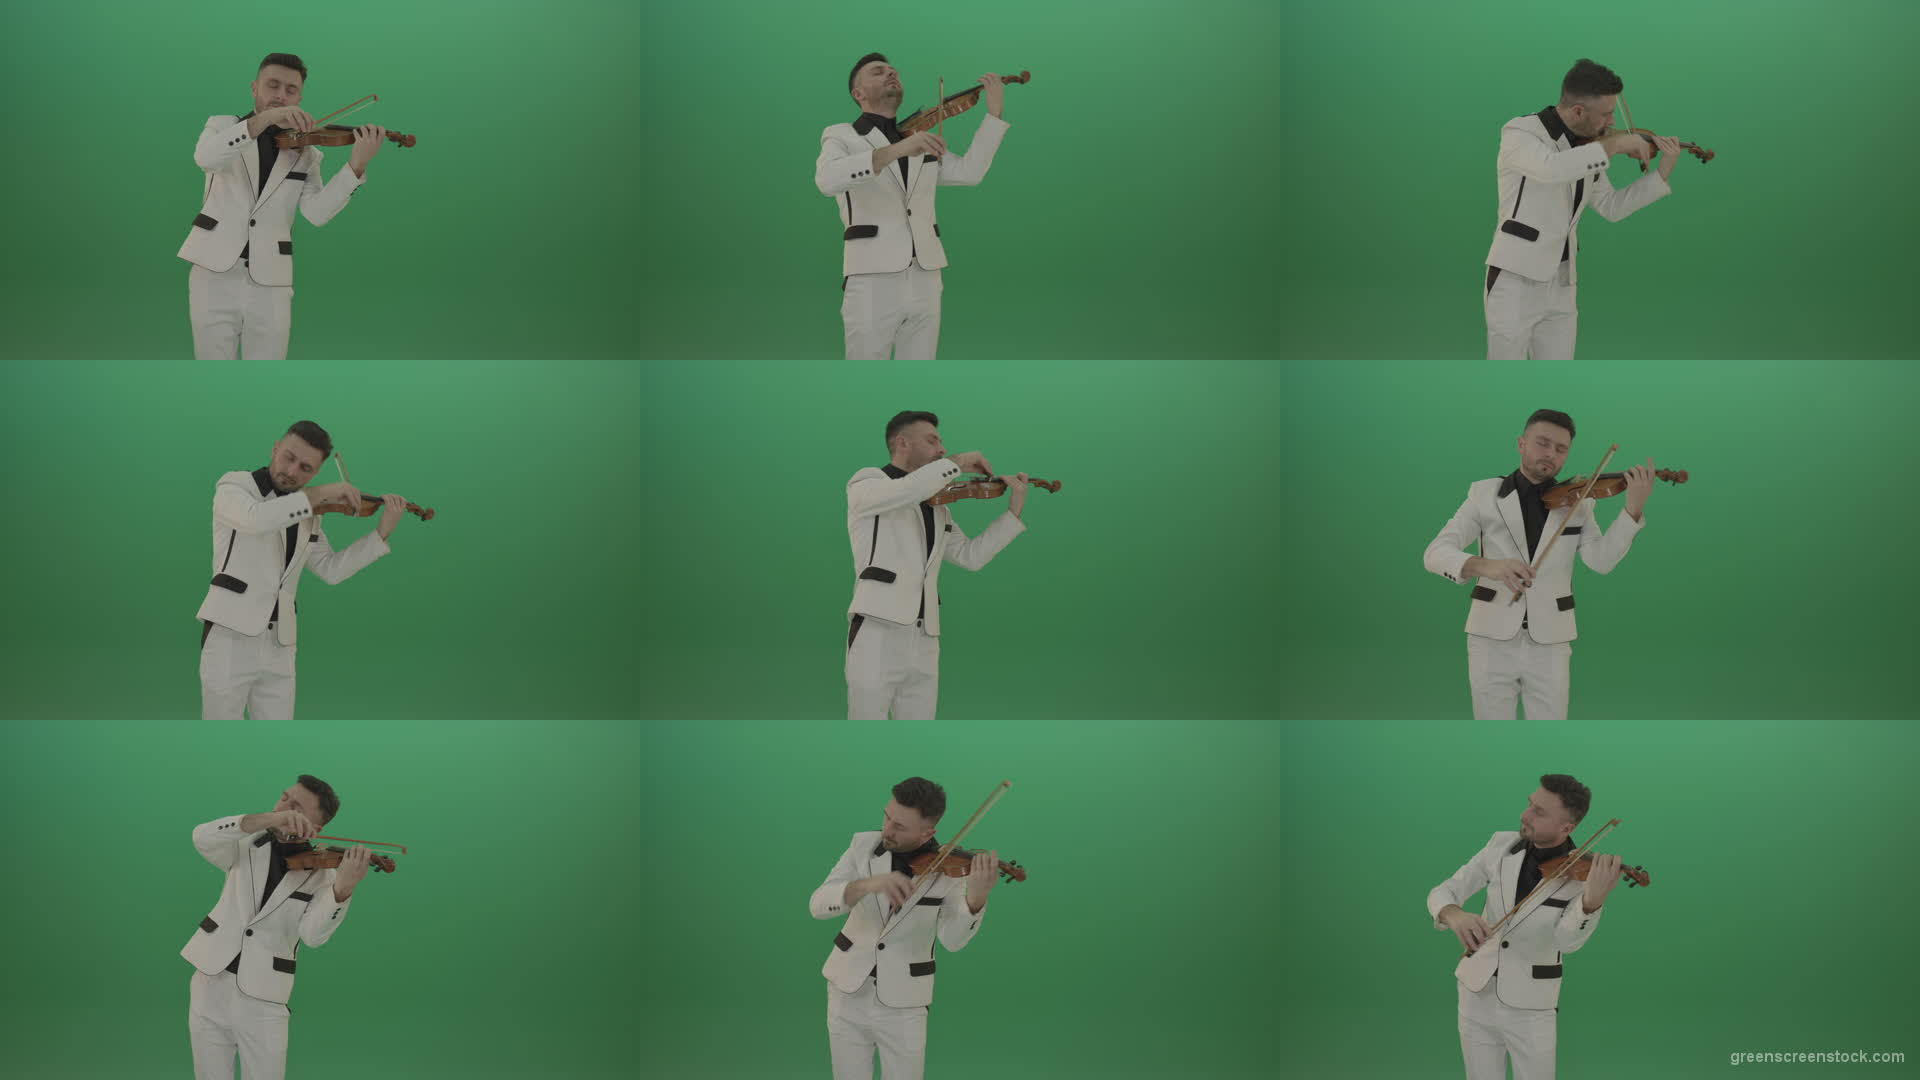 Man-is-playing-slow-love-in-white-costume-on-violin-Fiddle-string-music-instrument-isolated-on-green-screen Green Screen Stock